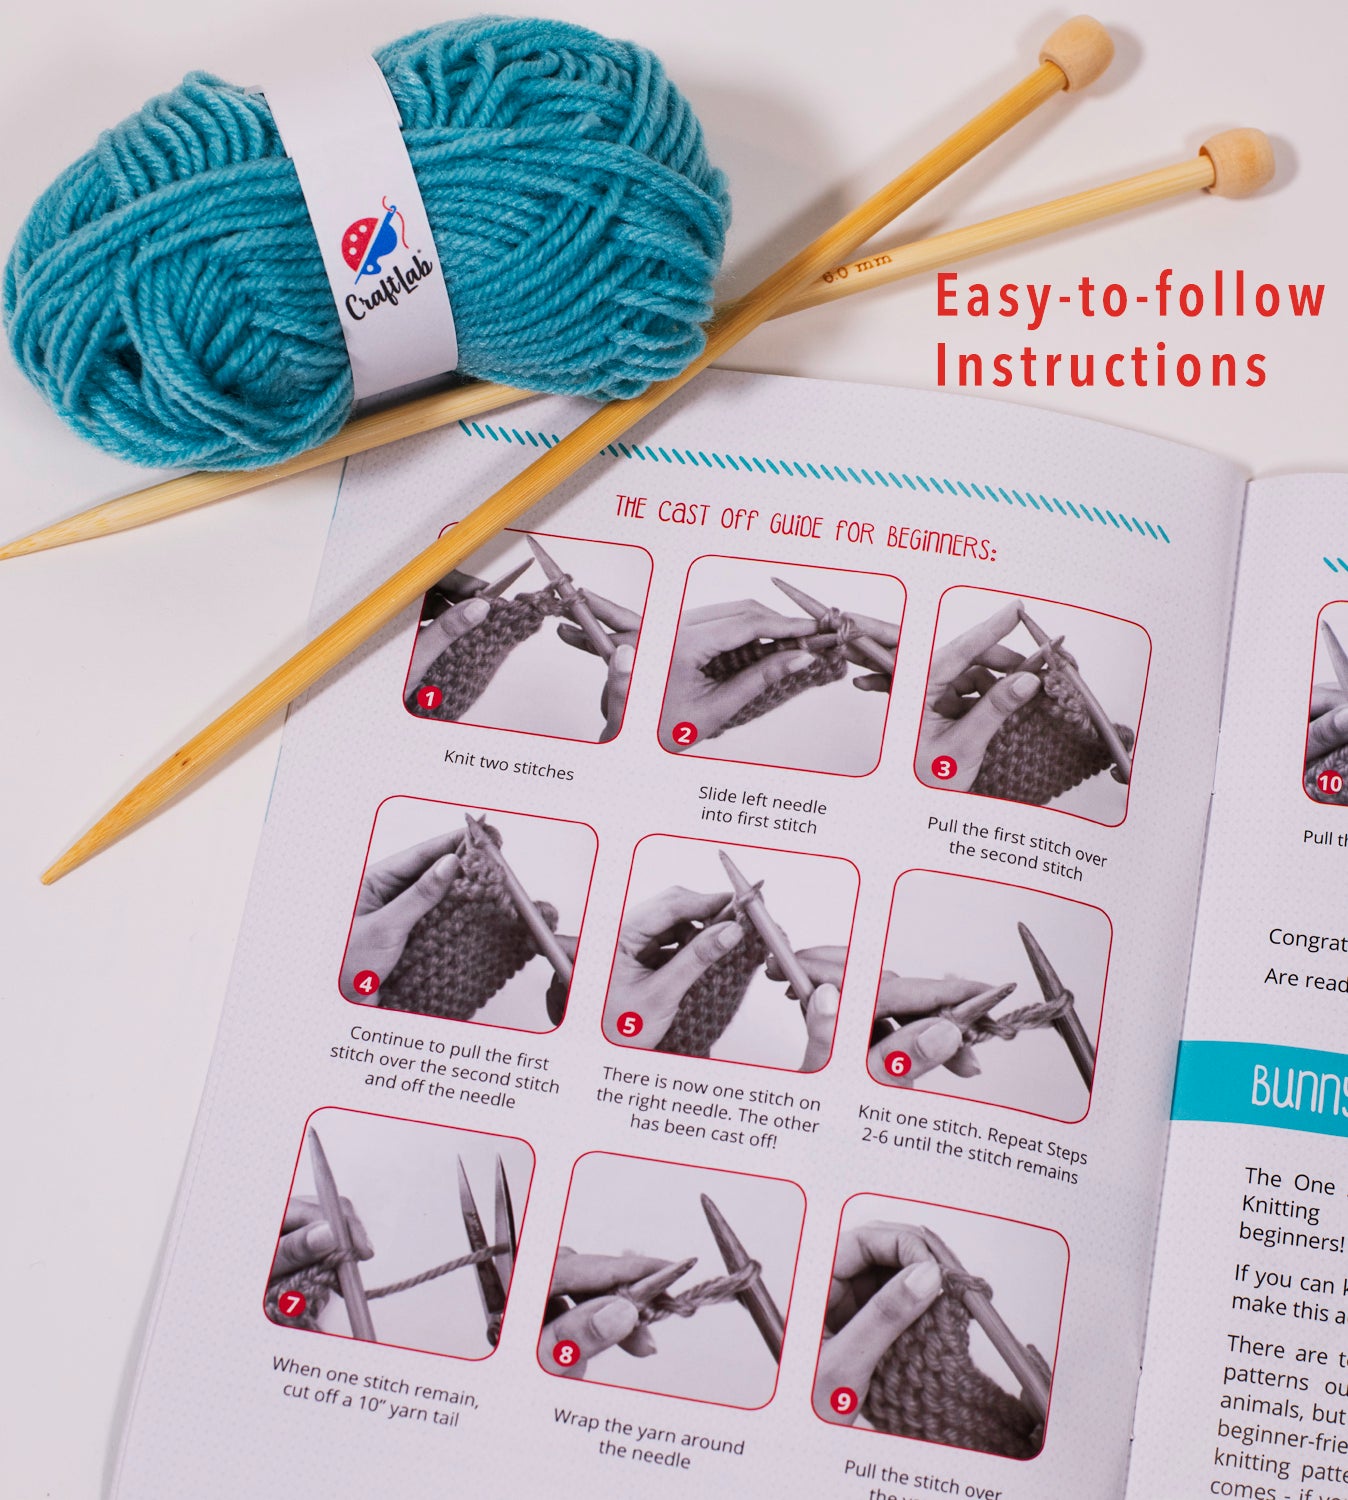 Knitting Kit for Beginners, Kids and Adults